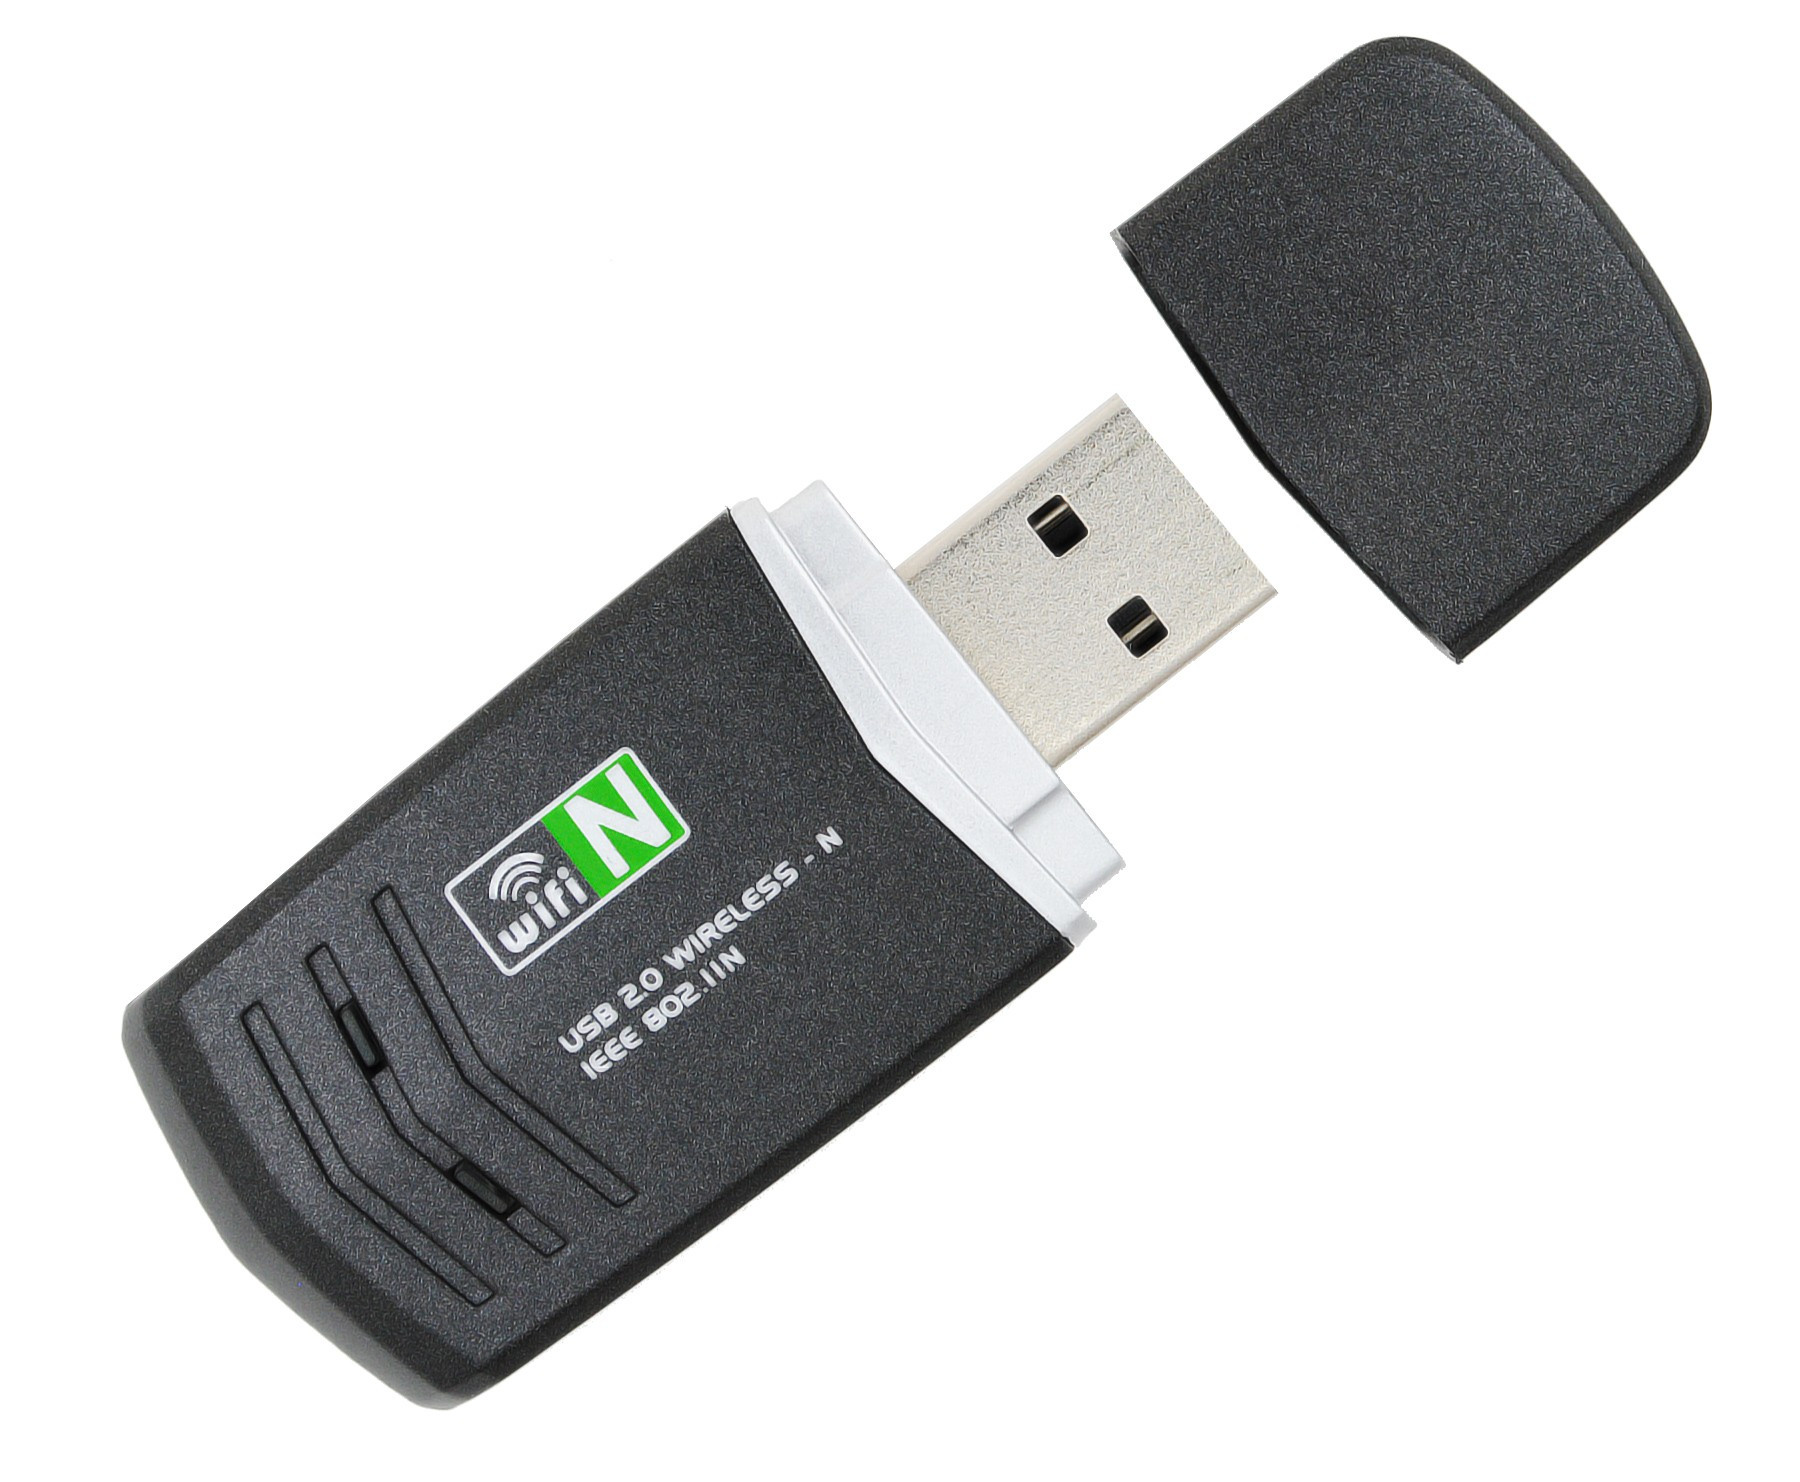 Odeon usb devices driver download windows 7